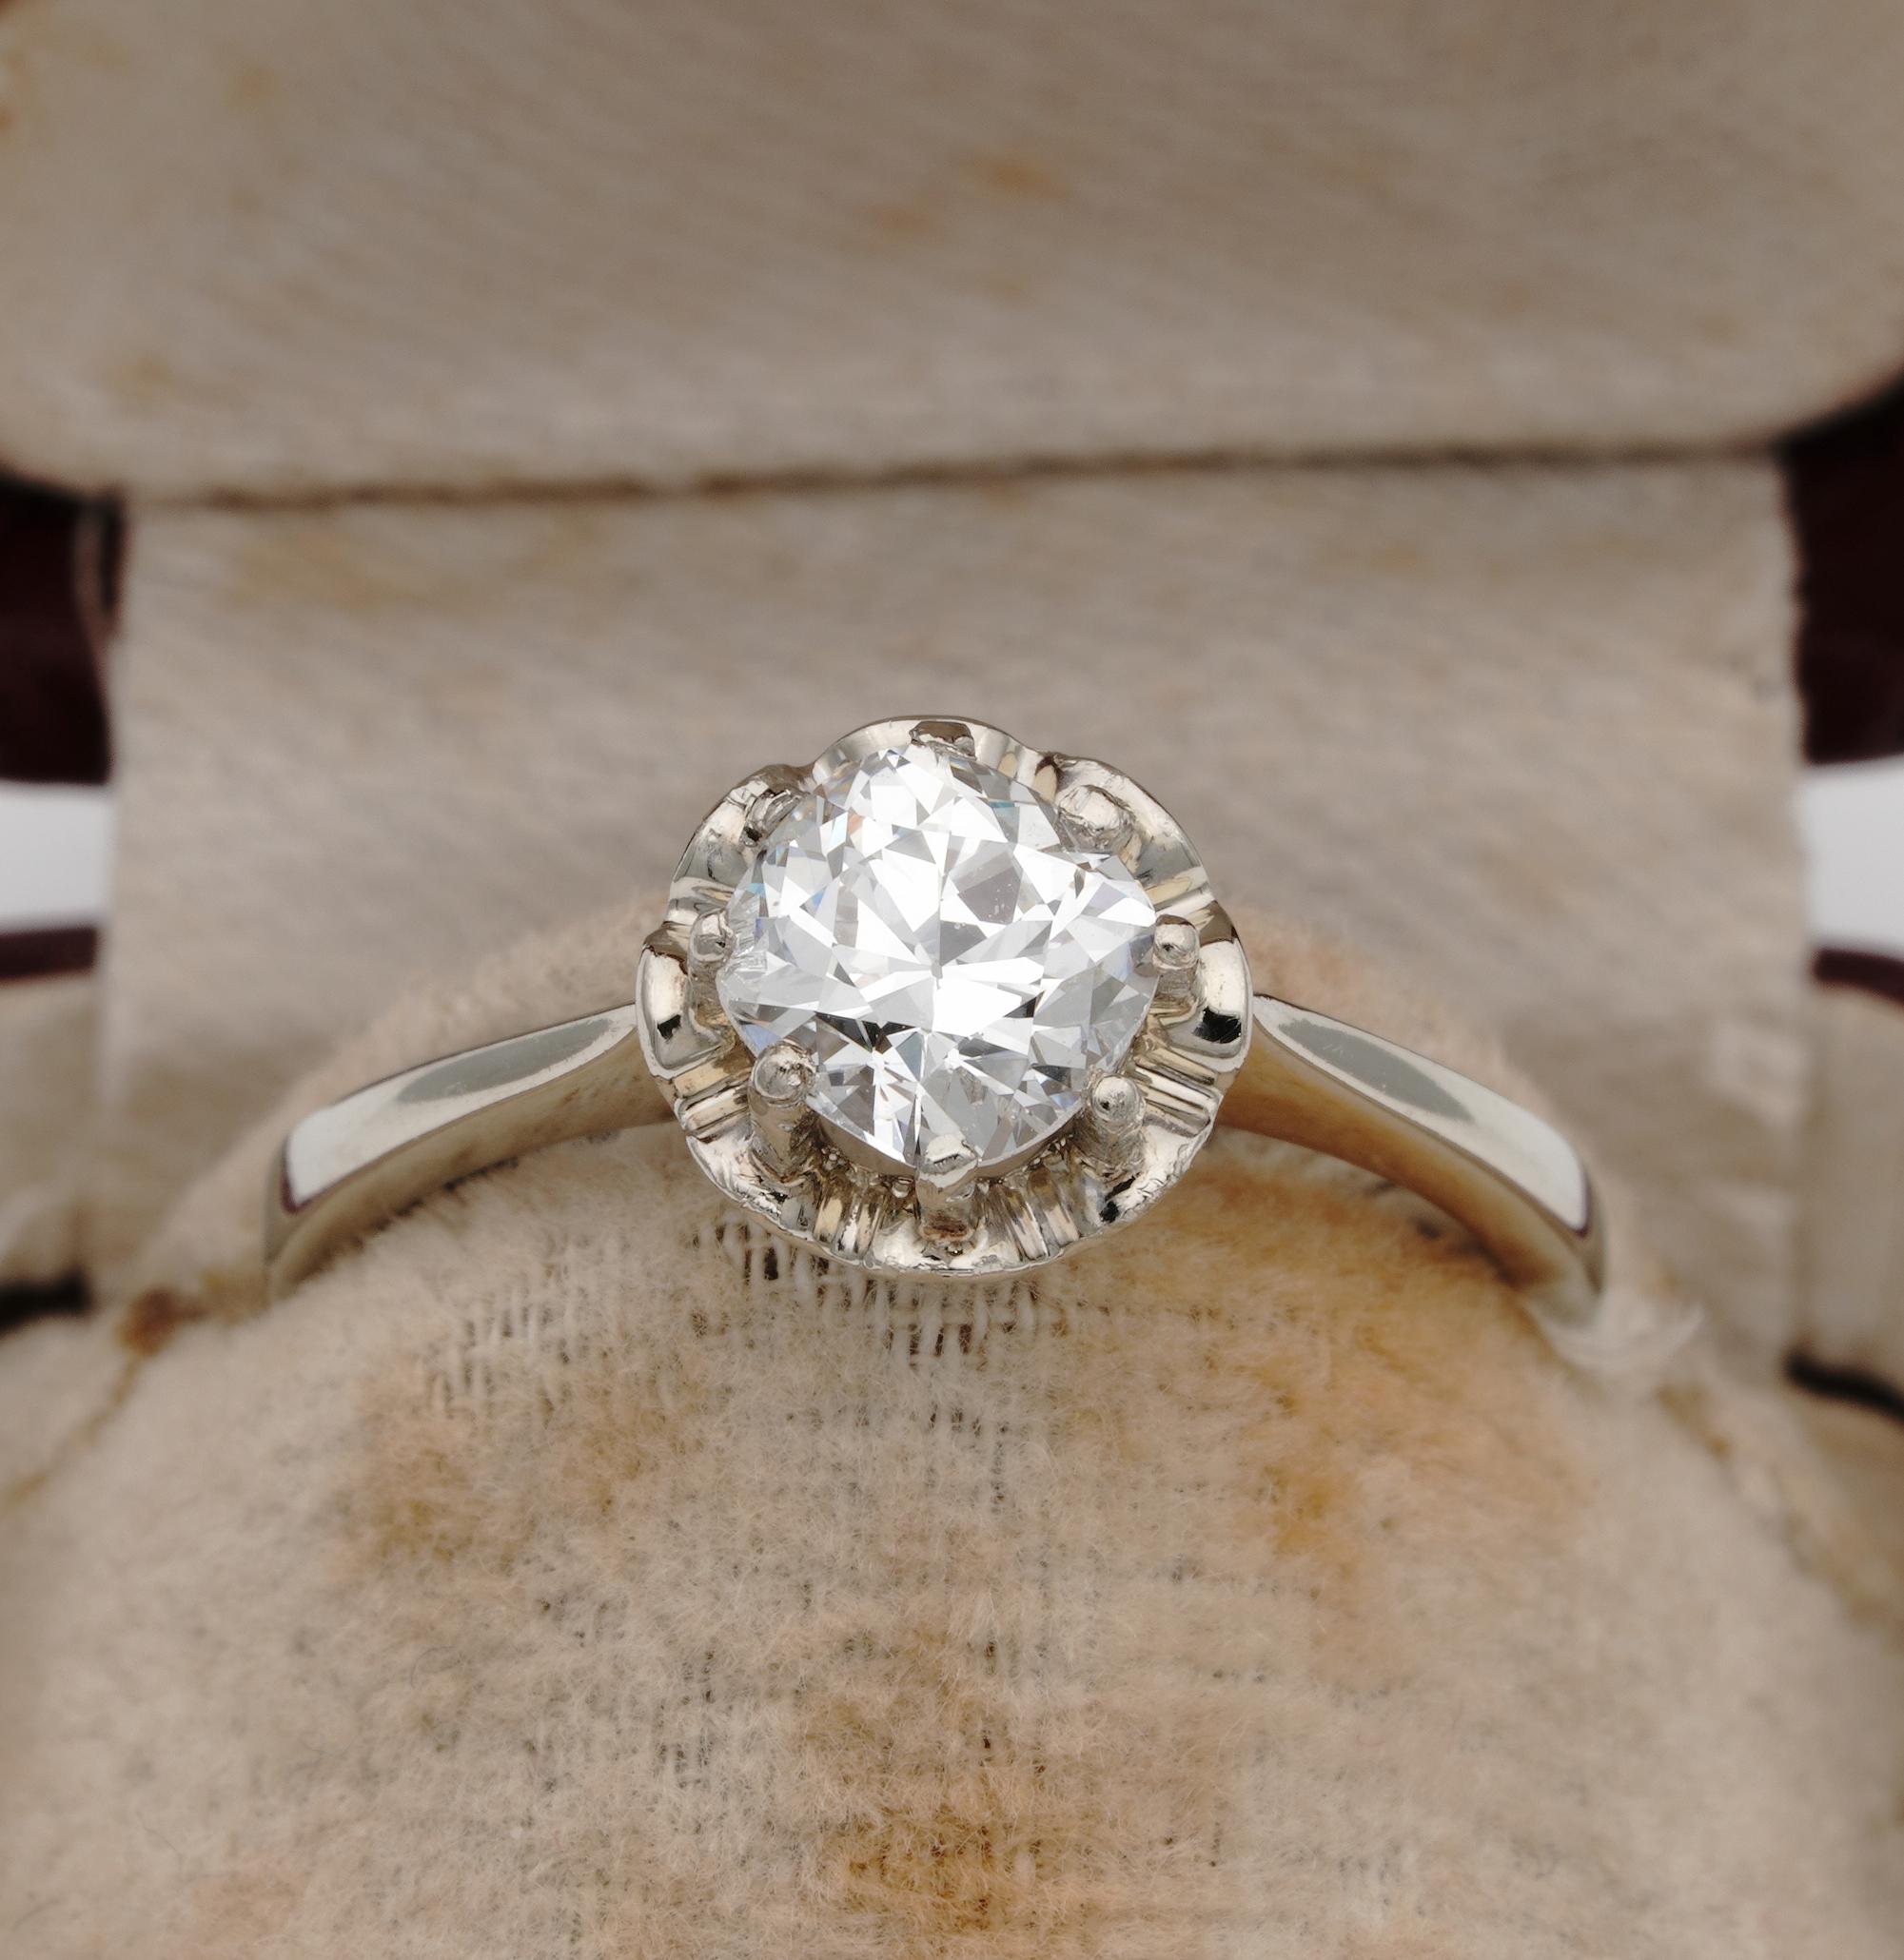 Engaged for Ever

Beautiful late Art Deco Diamond Solitaire Ring
Elegant, clean, classy style of 1935 ca with claws holding the Diamond
Centring a large 1.10 Ct antique cushion cut old European Diamond of 1.10 ct - Diamond is 6.07 mm. x 5.76 mm. -